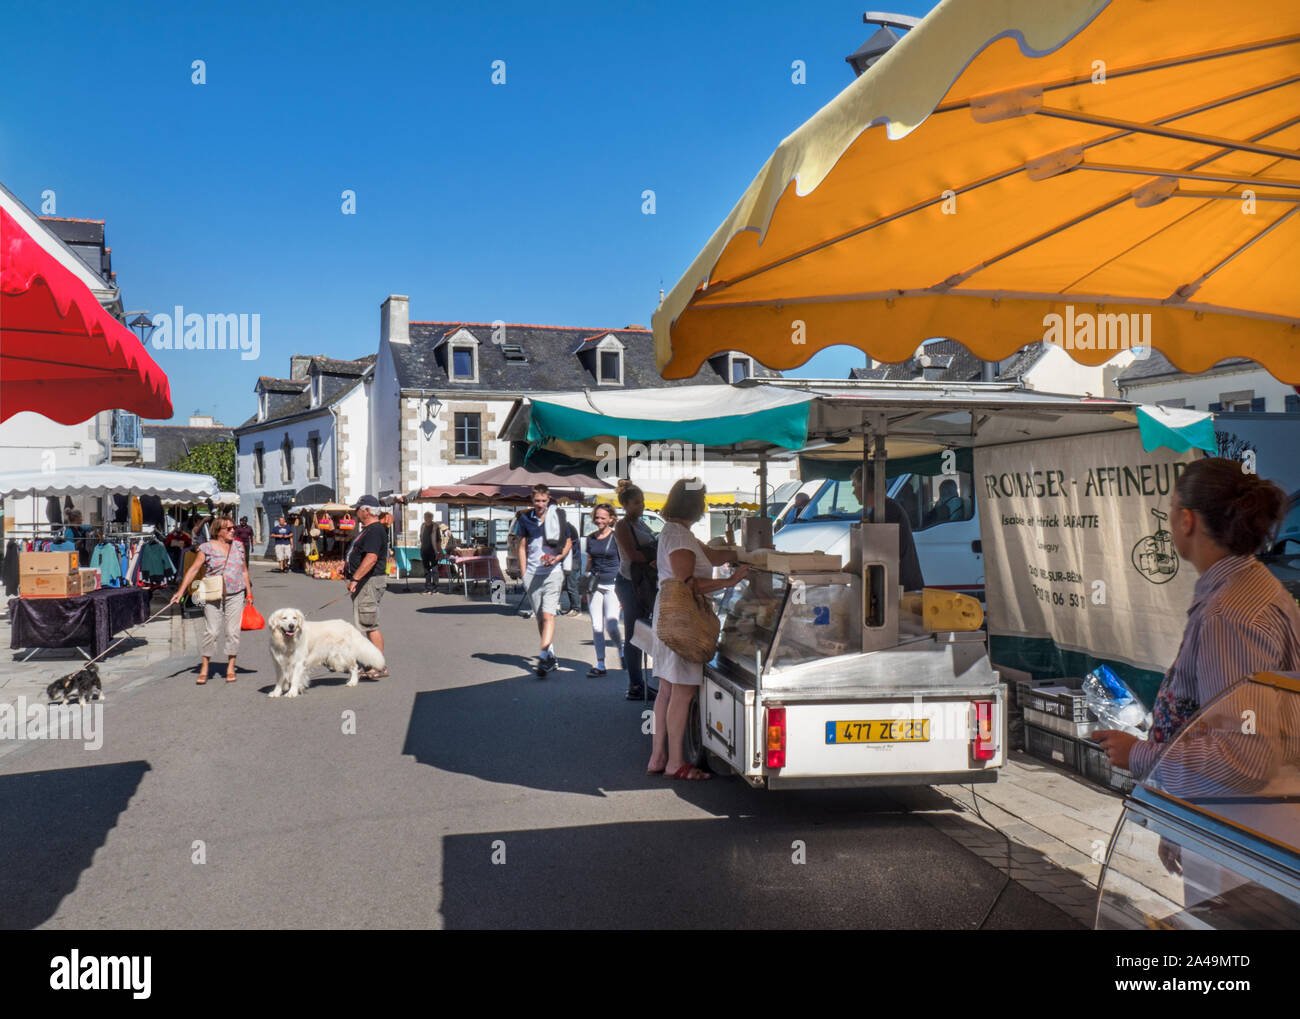 Breton Nevéz Brittany Street Market Charming French Breton weekly general market in church square selling local produce such as meats cheese clothing drinks basketware etc in Névez Brittany France Stock Photo